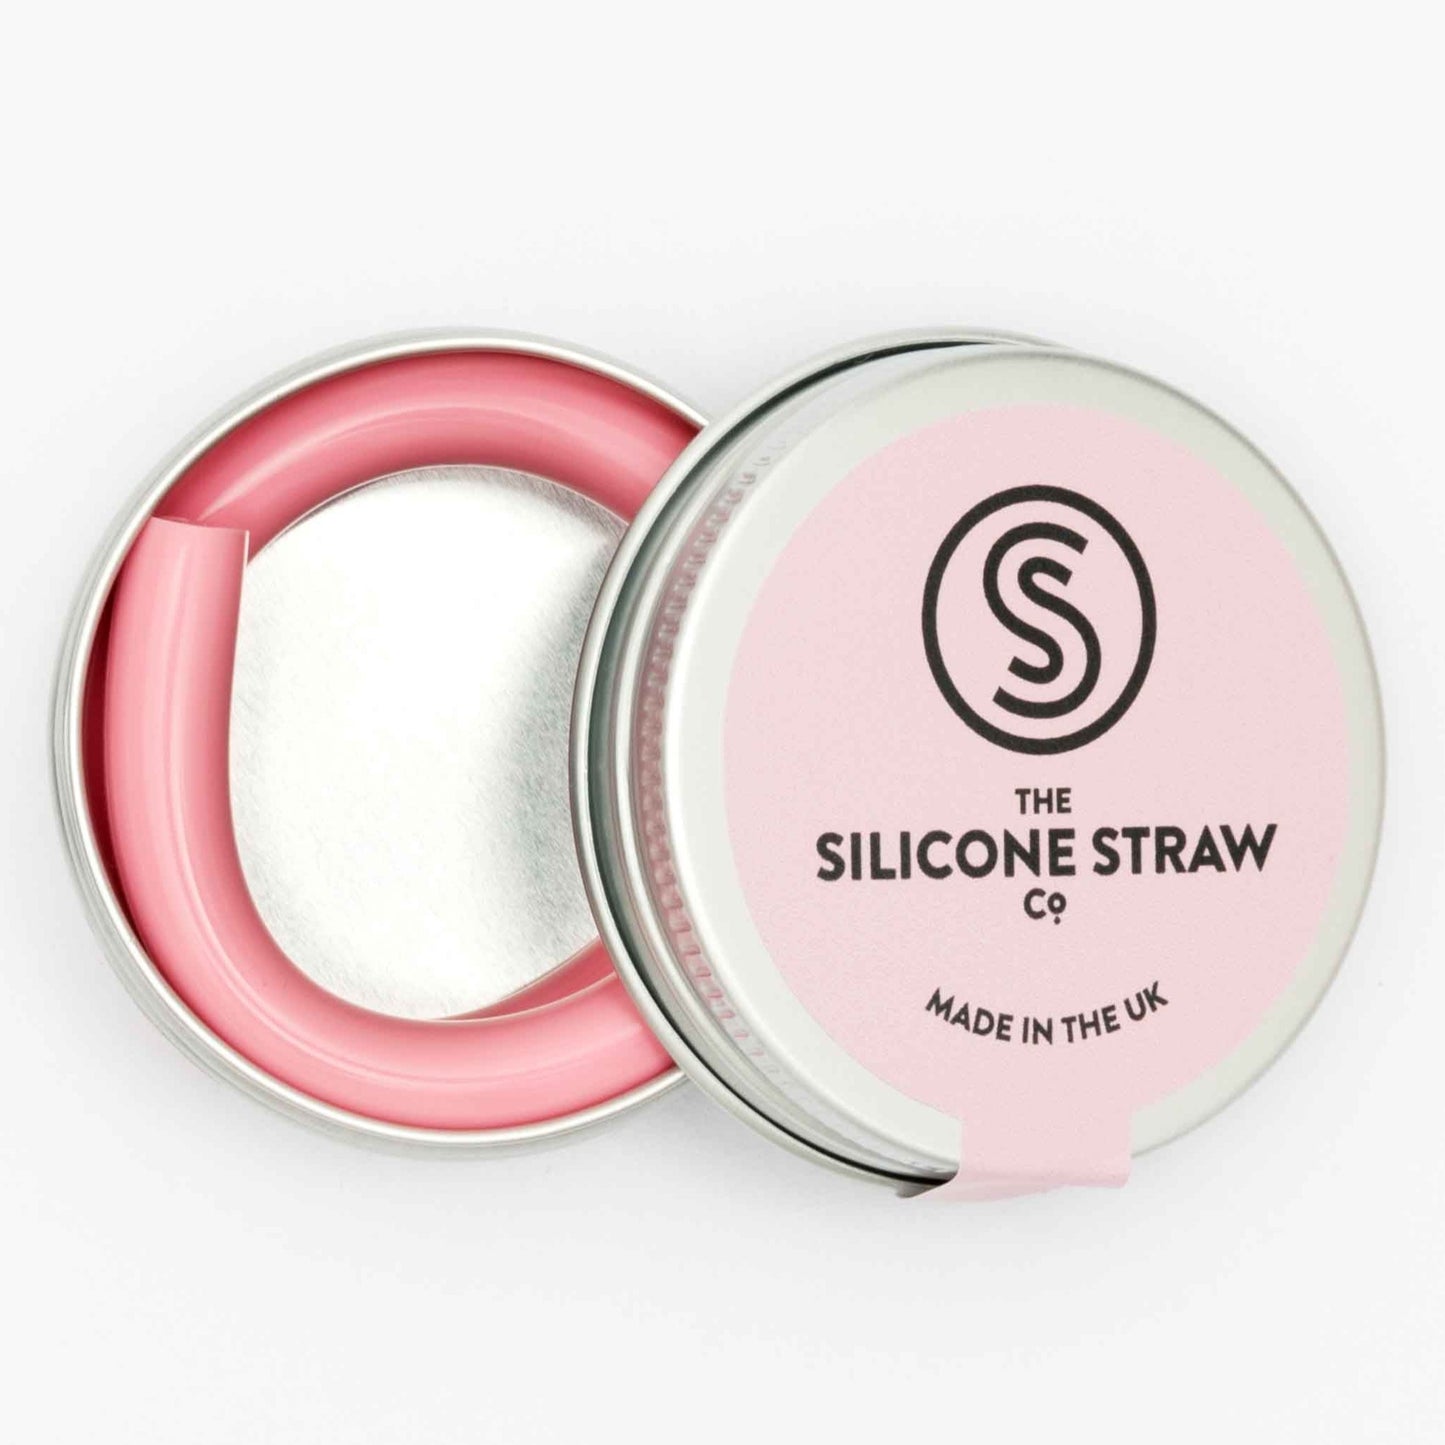 The Silicone Straw Company - Reusable straws in tins